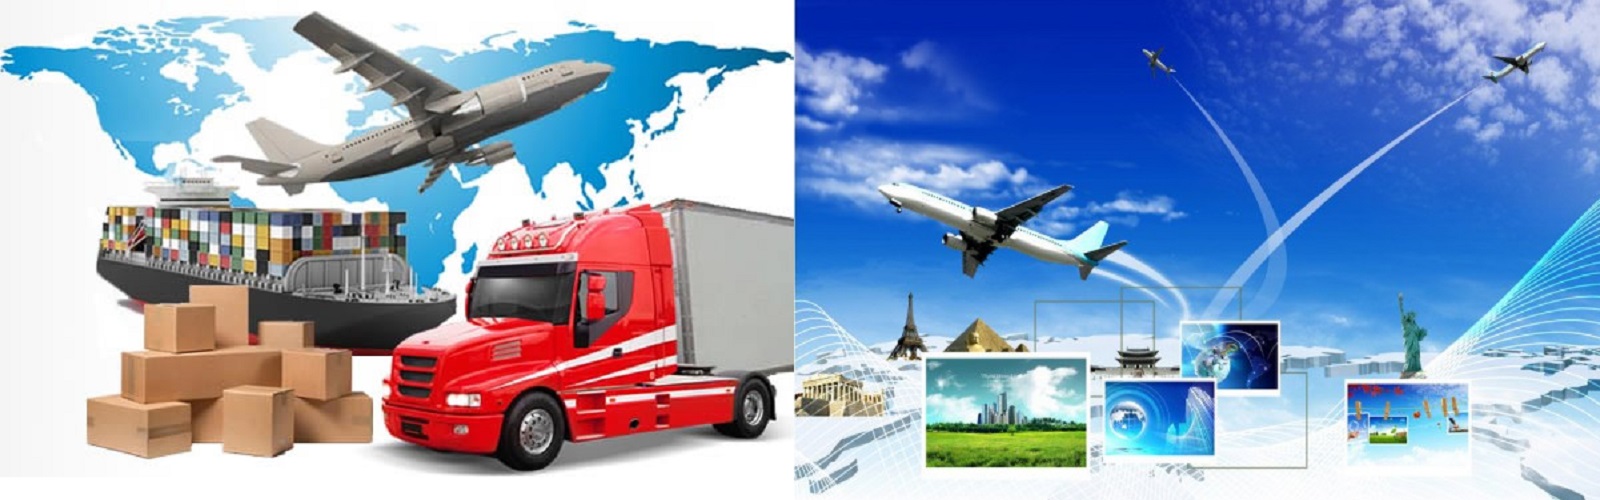 international-relocation-services-1600x500